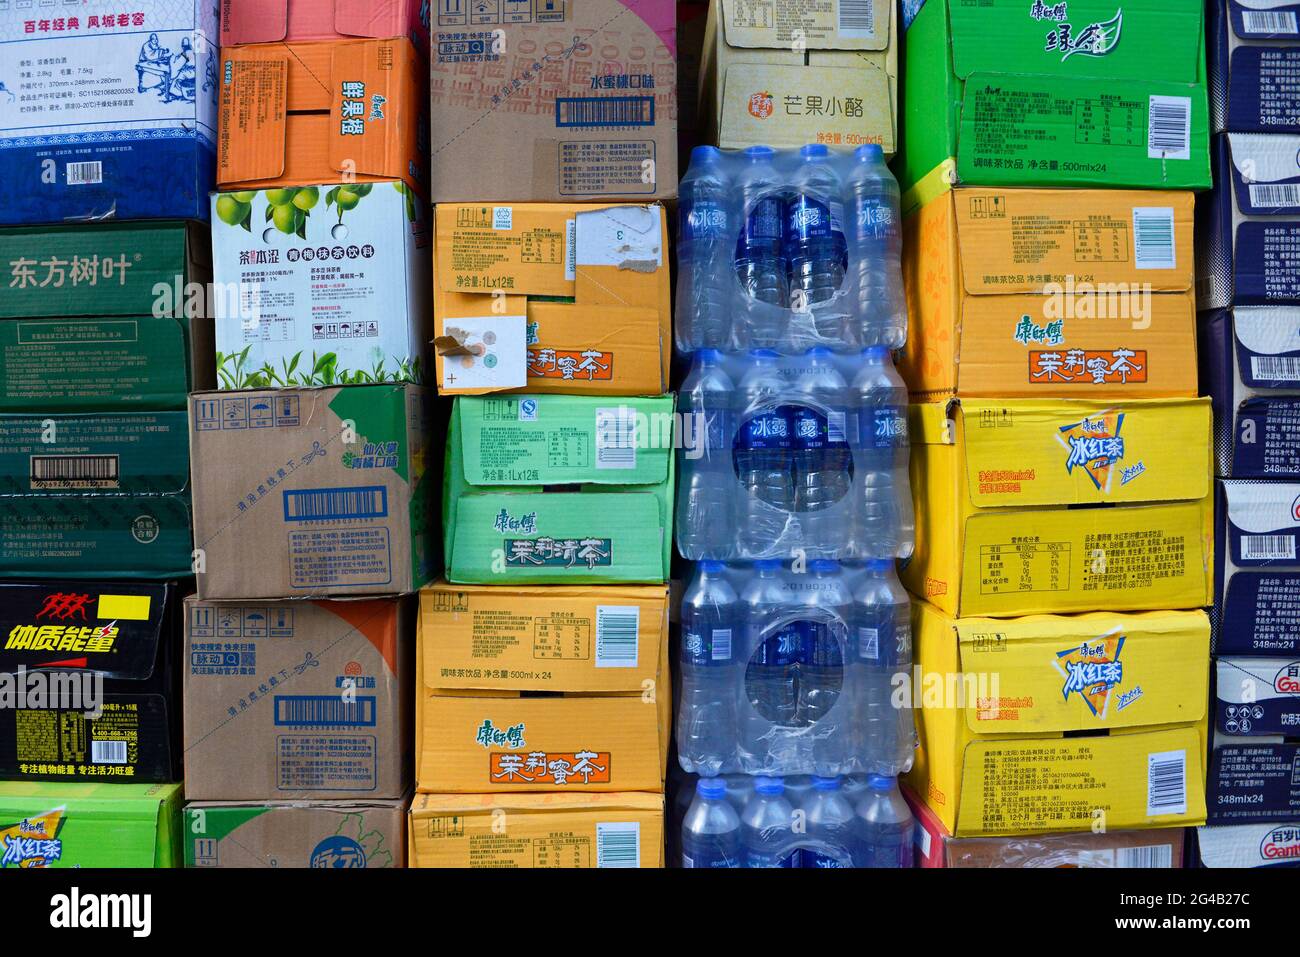 Many boxes of bottled drinks piled outside a convenience store in Dandong, Liaoning province, China Stock Photo